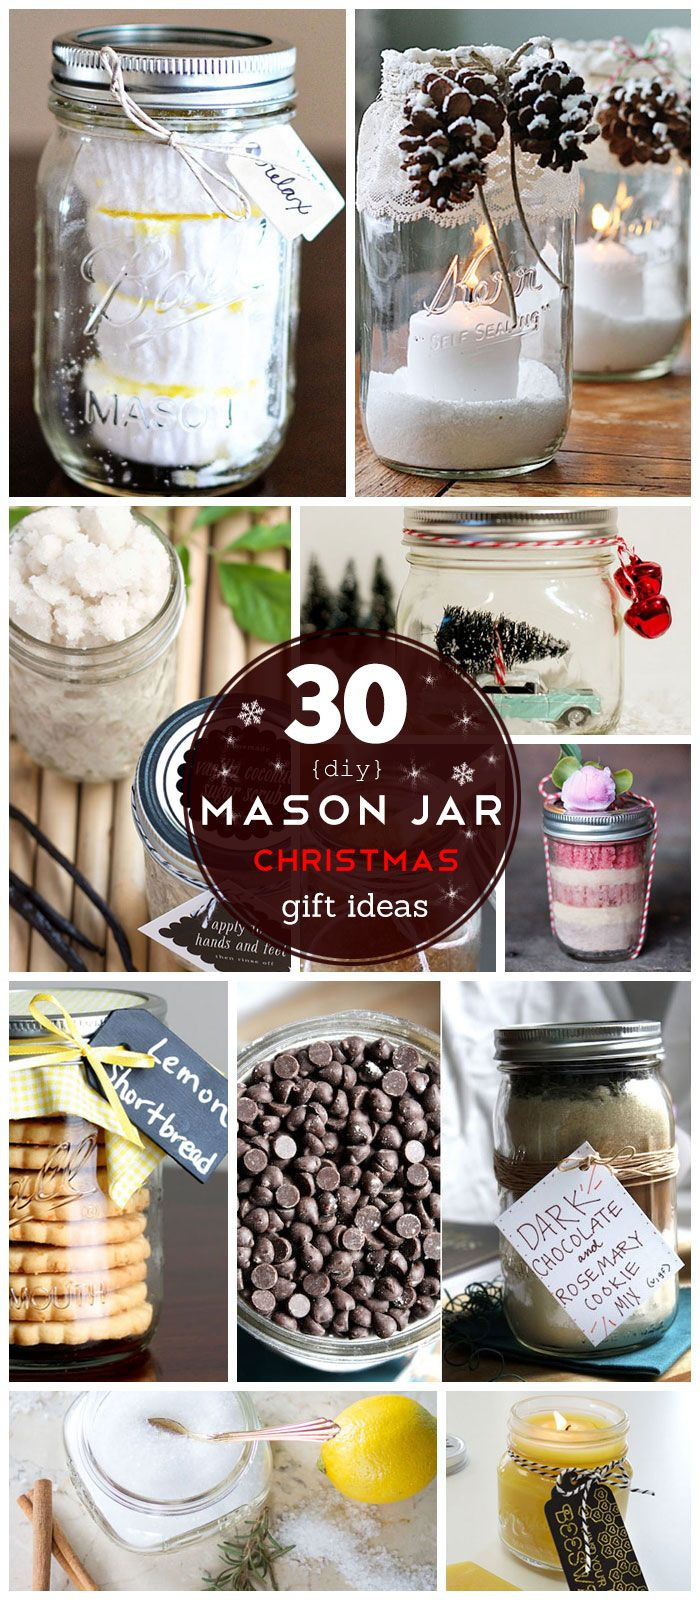 DIY Mason Jar Christmas Gifts
 17 Best ideas about Inexpensive Christmas Gifts on